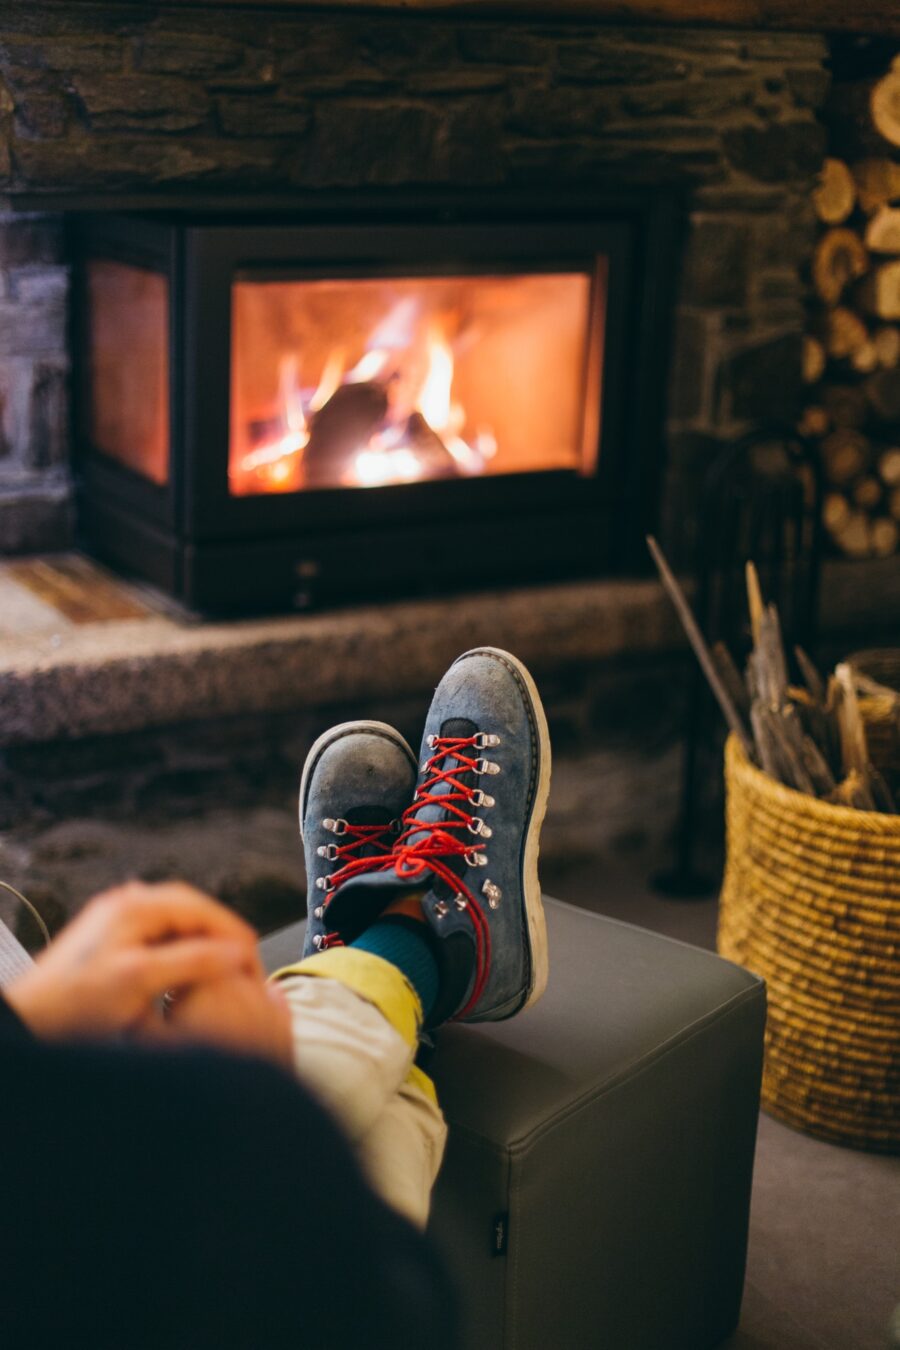 Protect Your Child Against Fireplace Risks